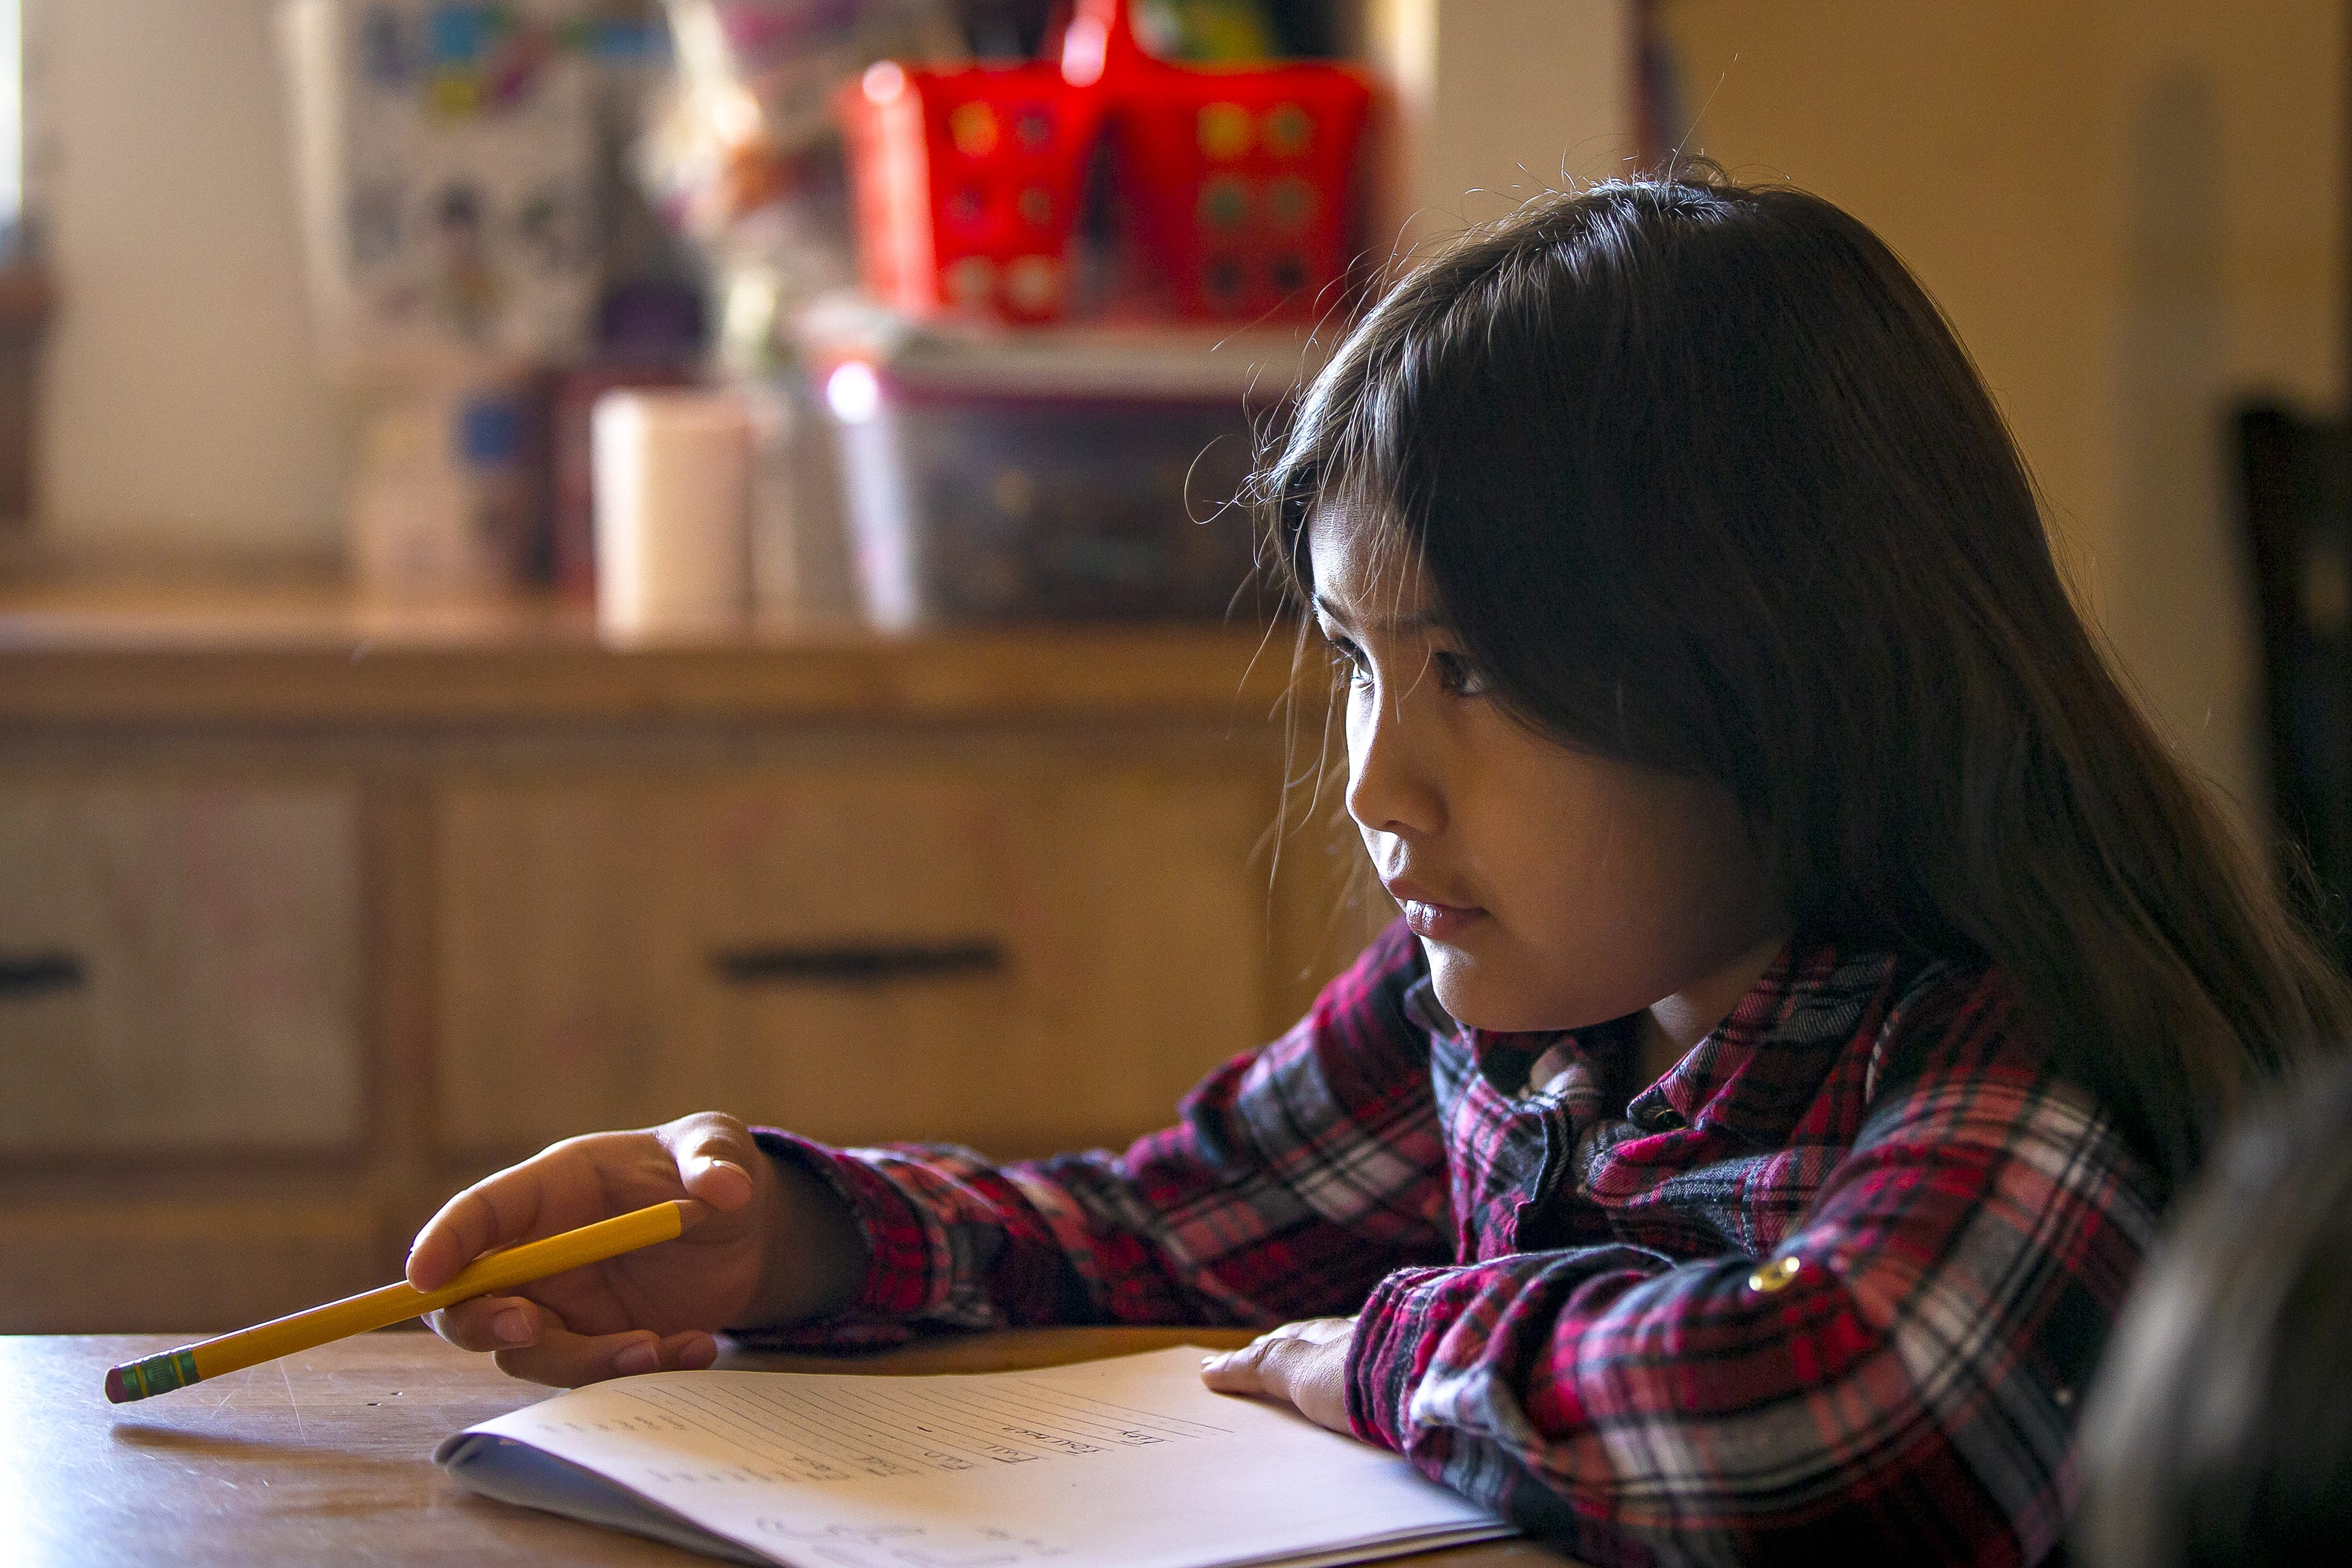 Fernanda Davila, 8, pauses to think as she completes homework in her Phoenix home on March 8, 2022.